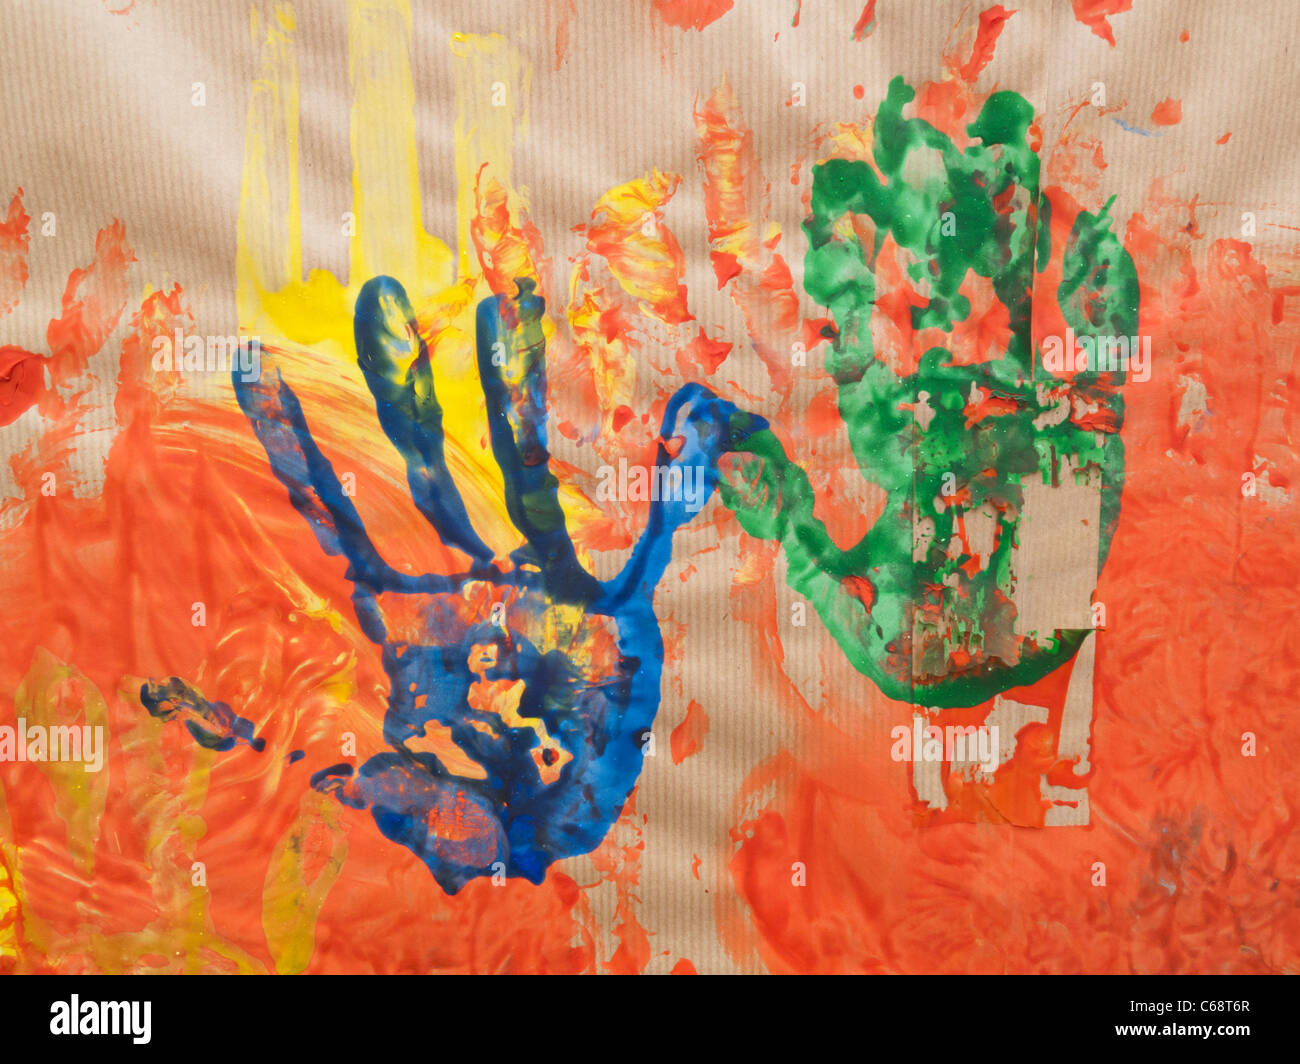 Impression of hands made with paint on brown paper Stock Photo